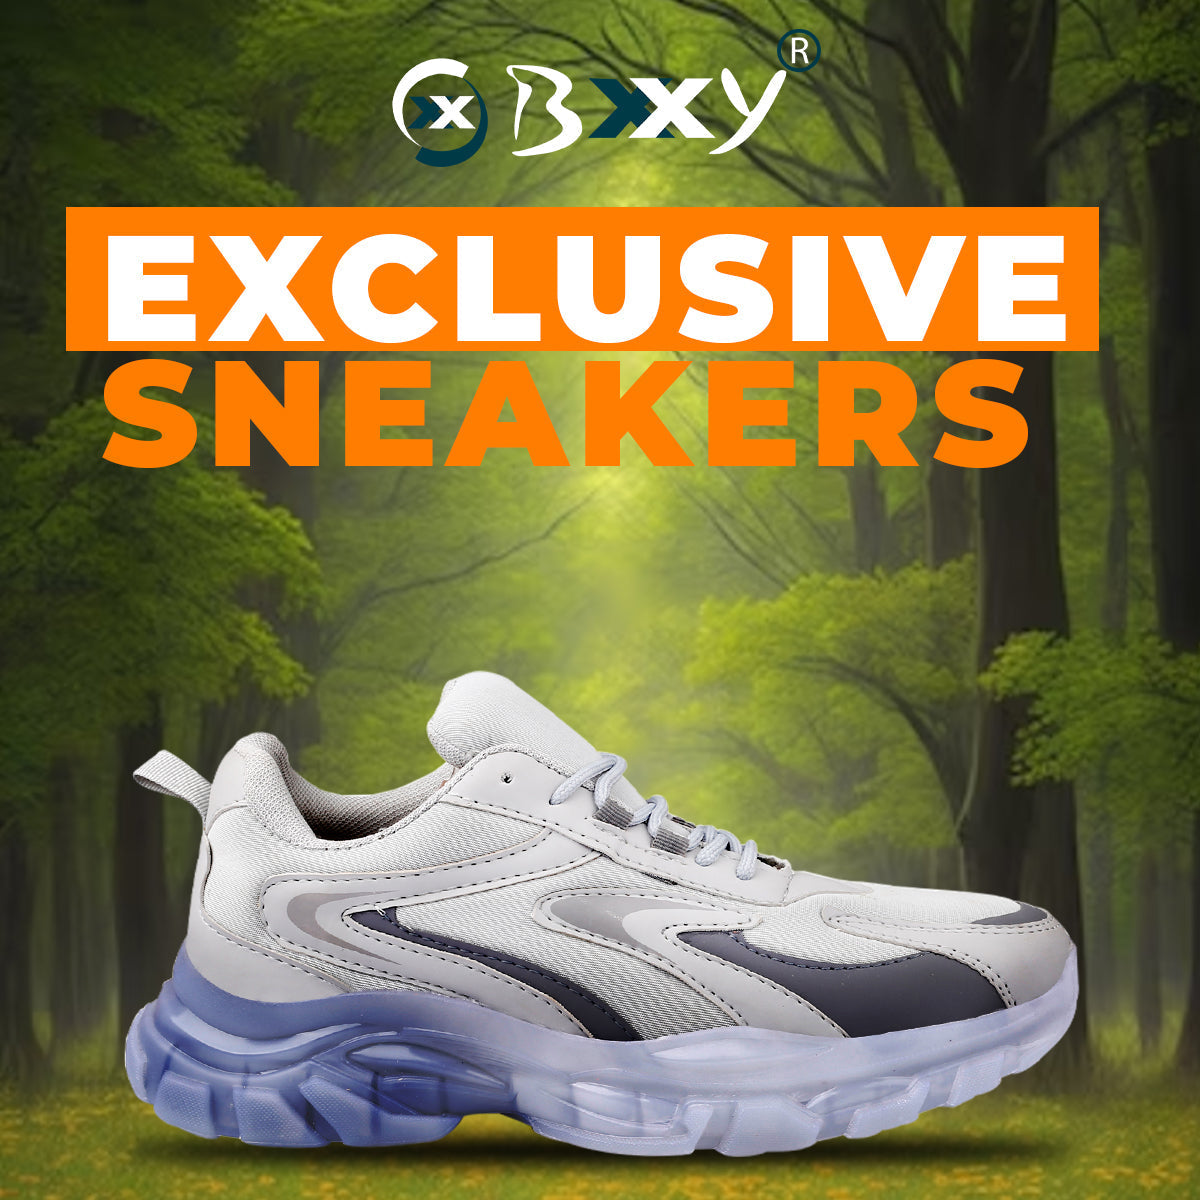 Bxxy's Superior Launch Casual Sports Sneakers for Men